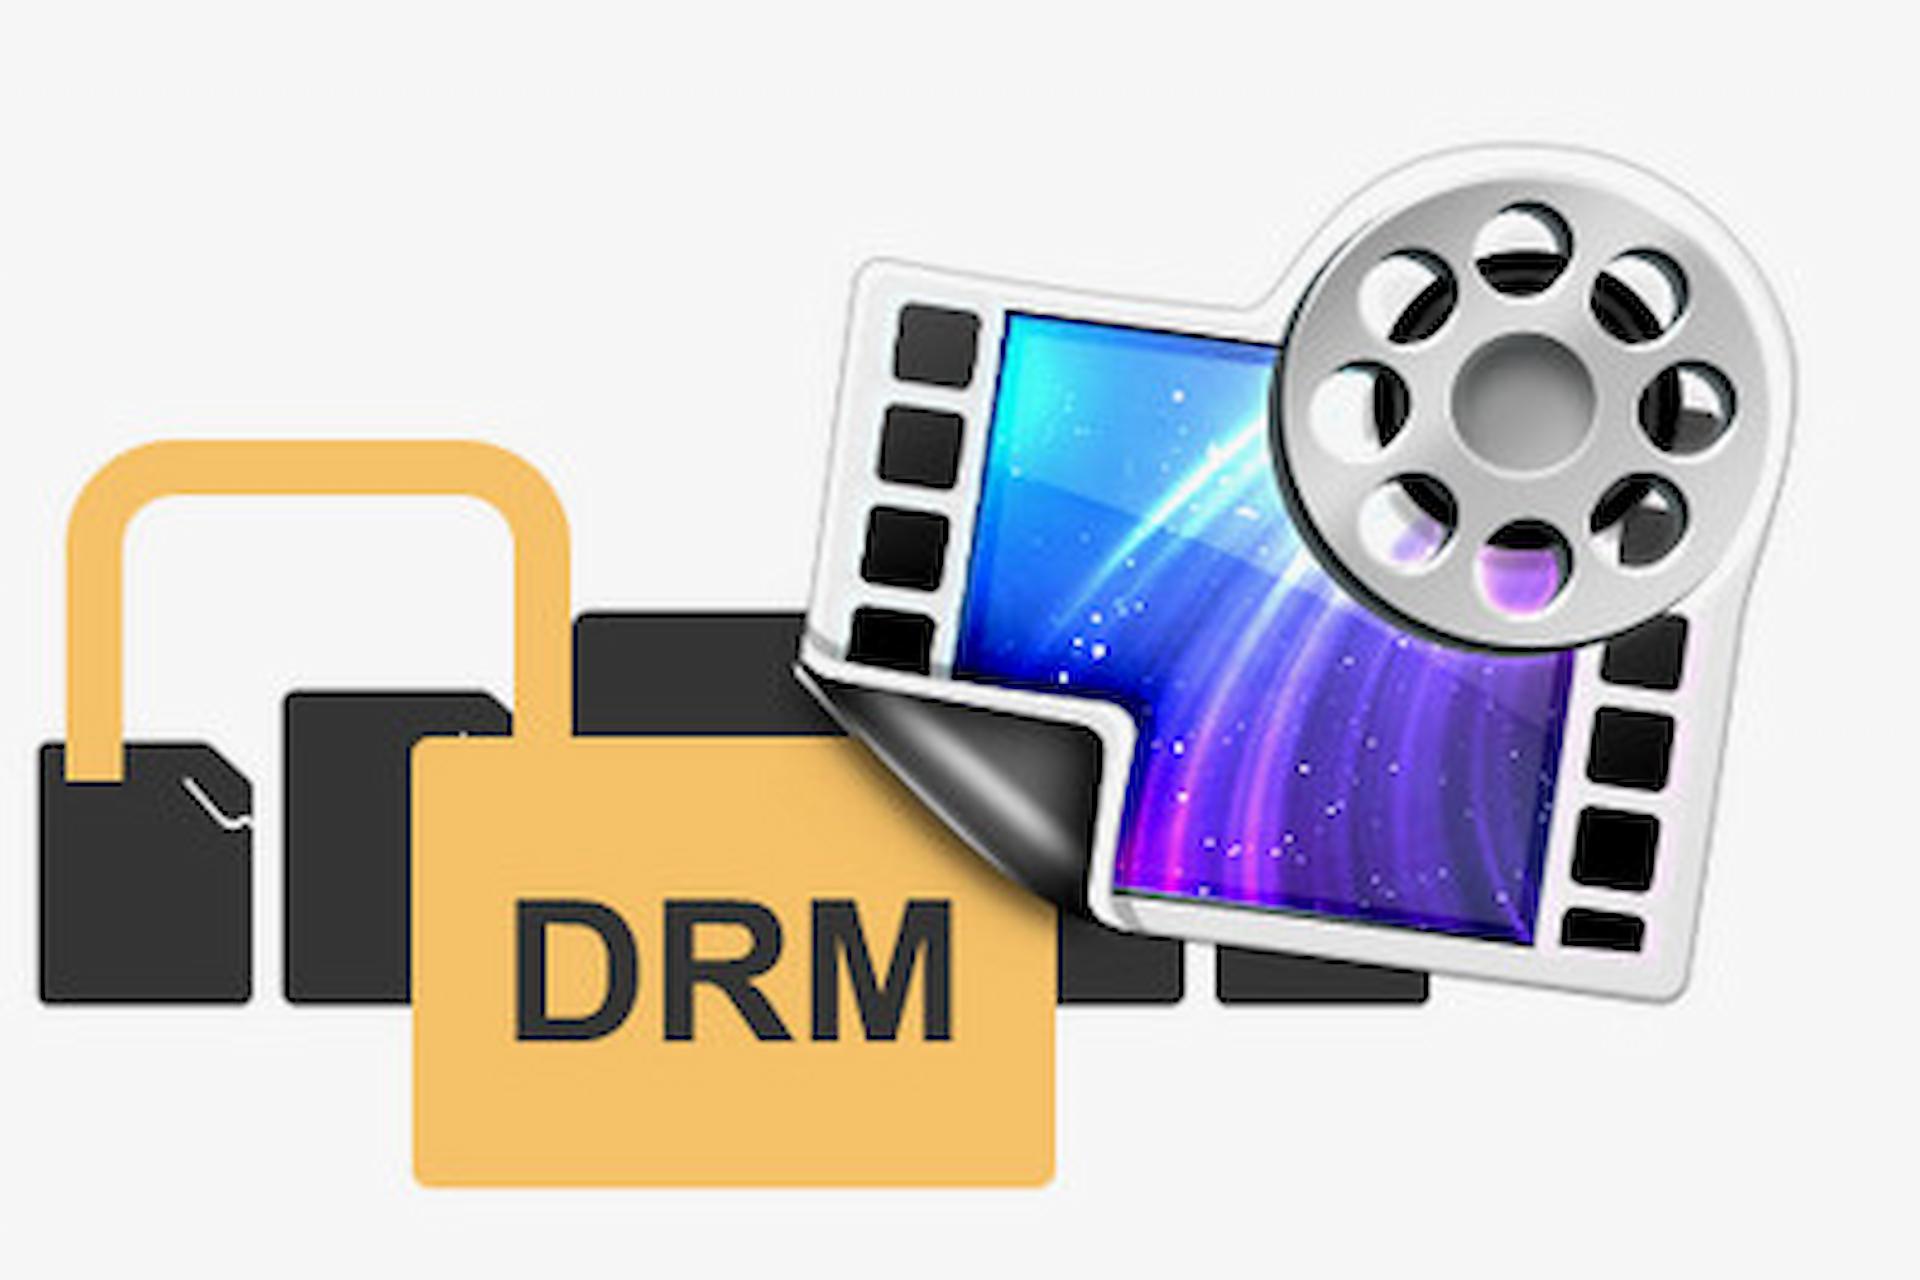 What Are The Steps I Need To Take To Integrate Video DRM Into My Website Or App?